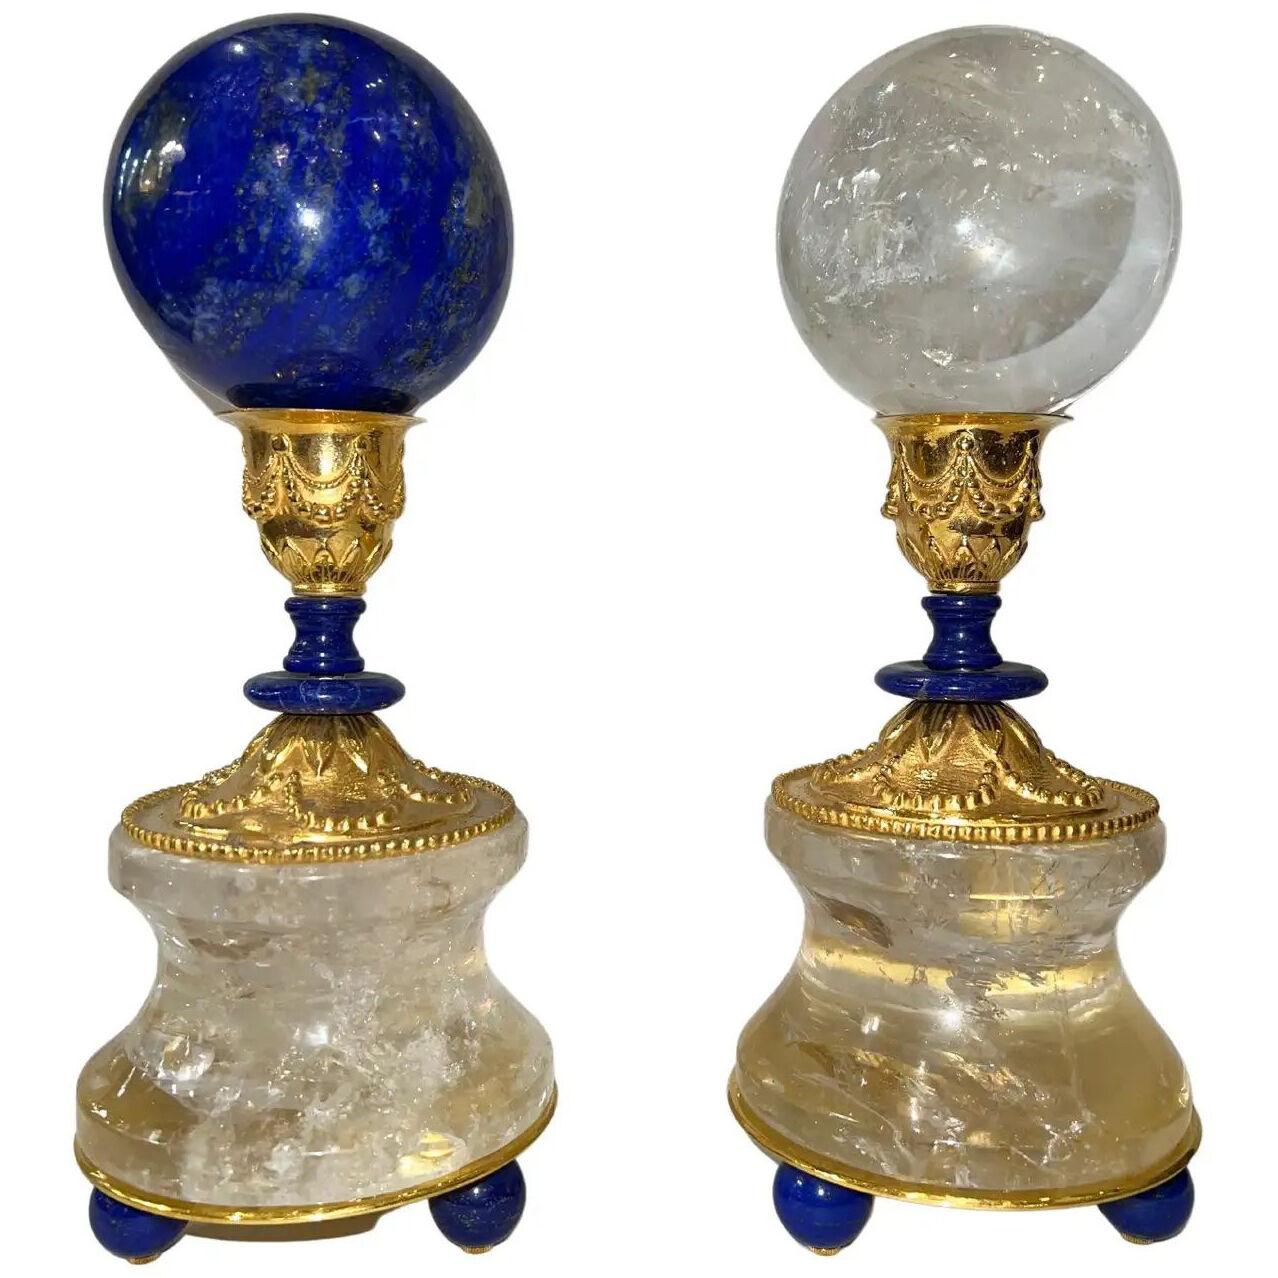 Pair of Support Rock Crystal and Lapis Lazuli Spheres by Alexandre Vossion